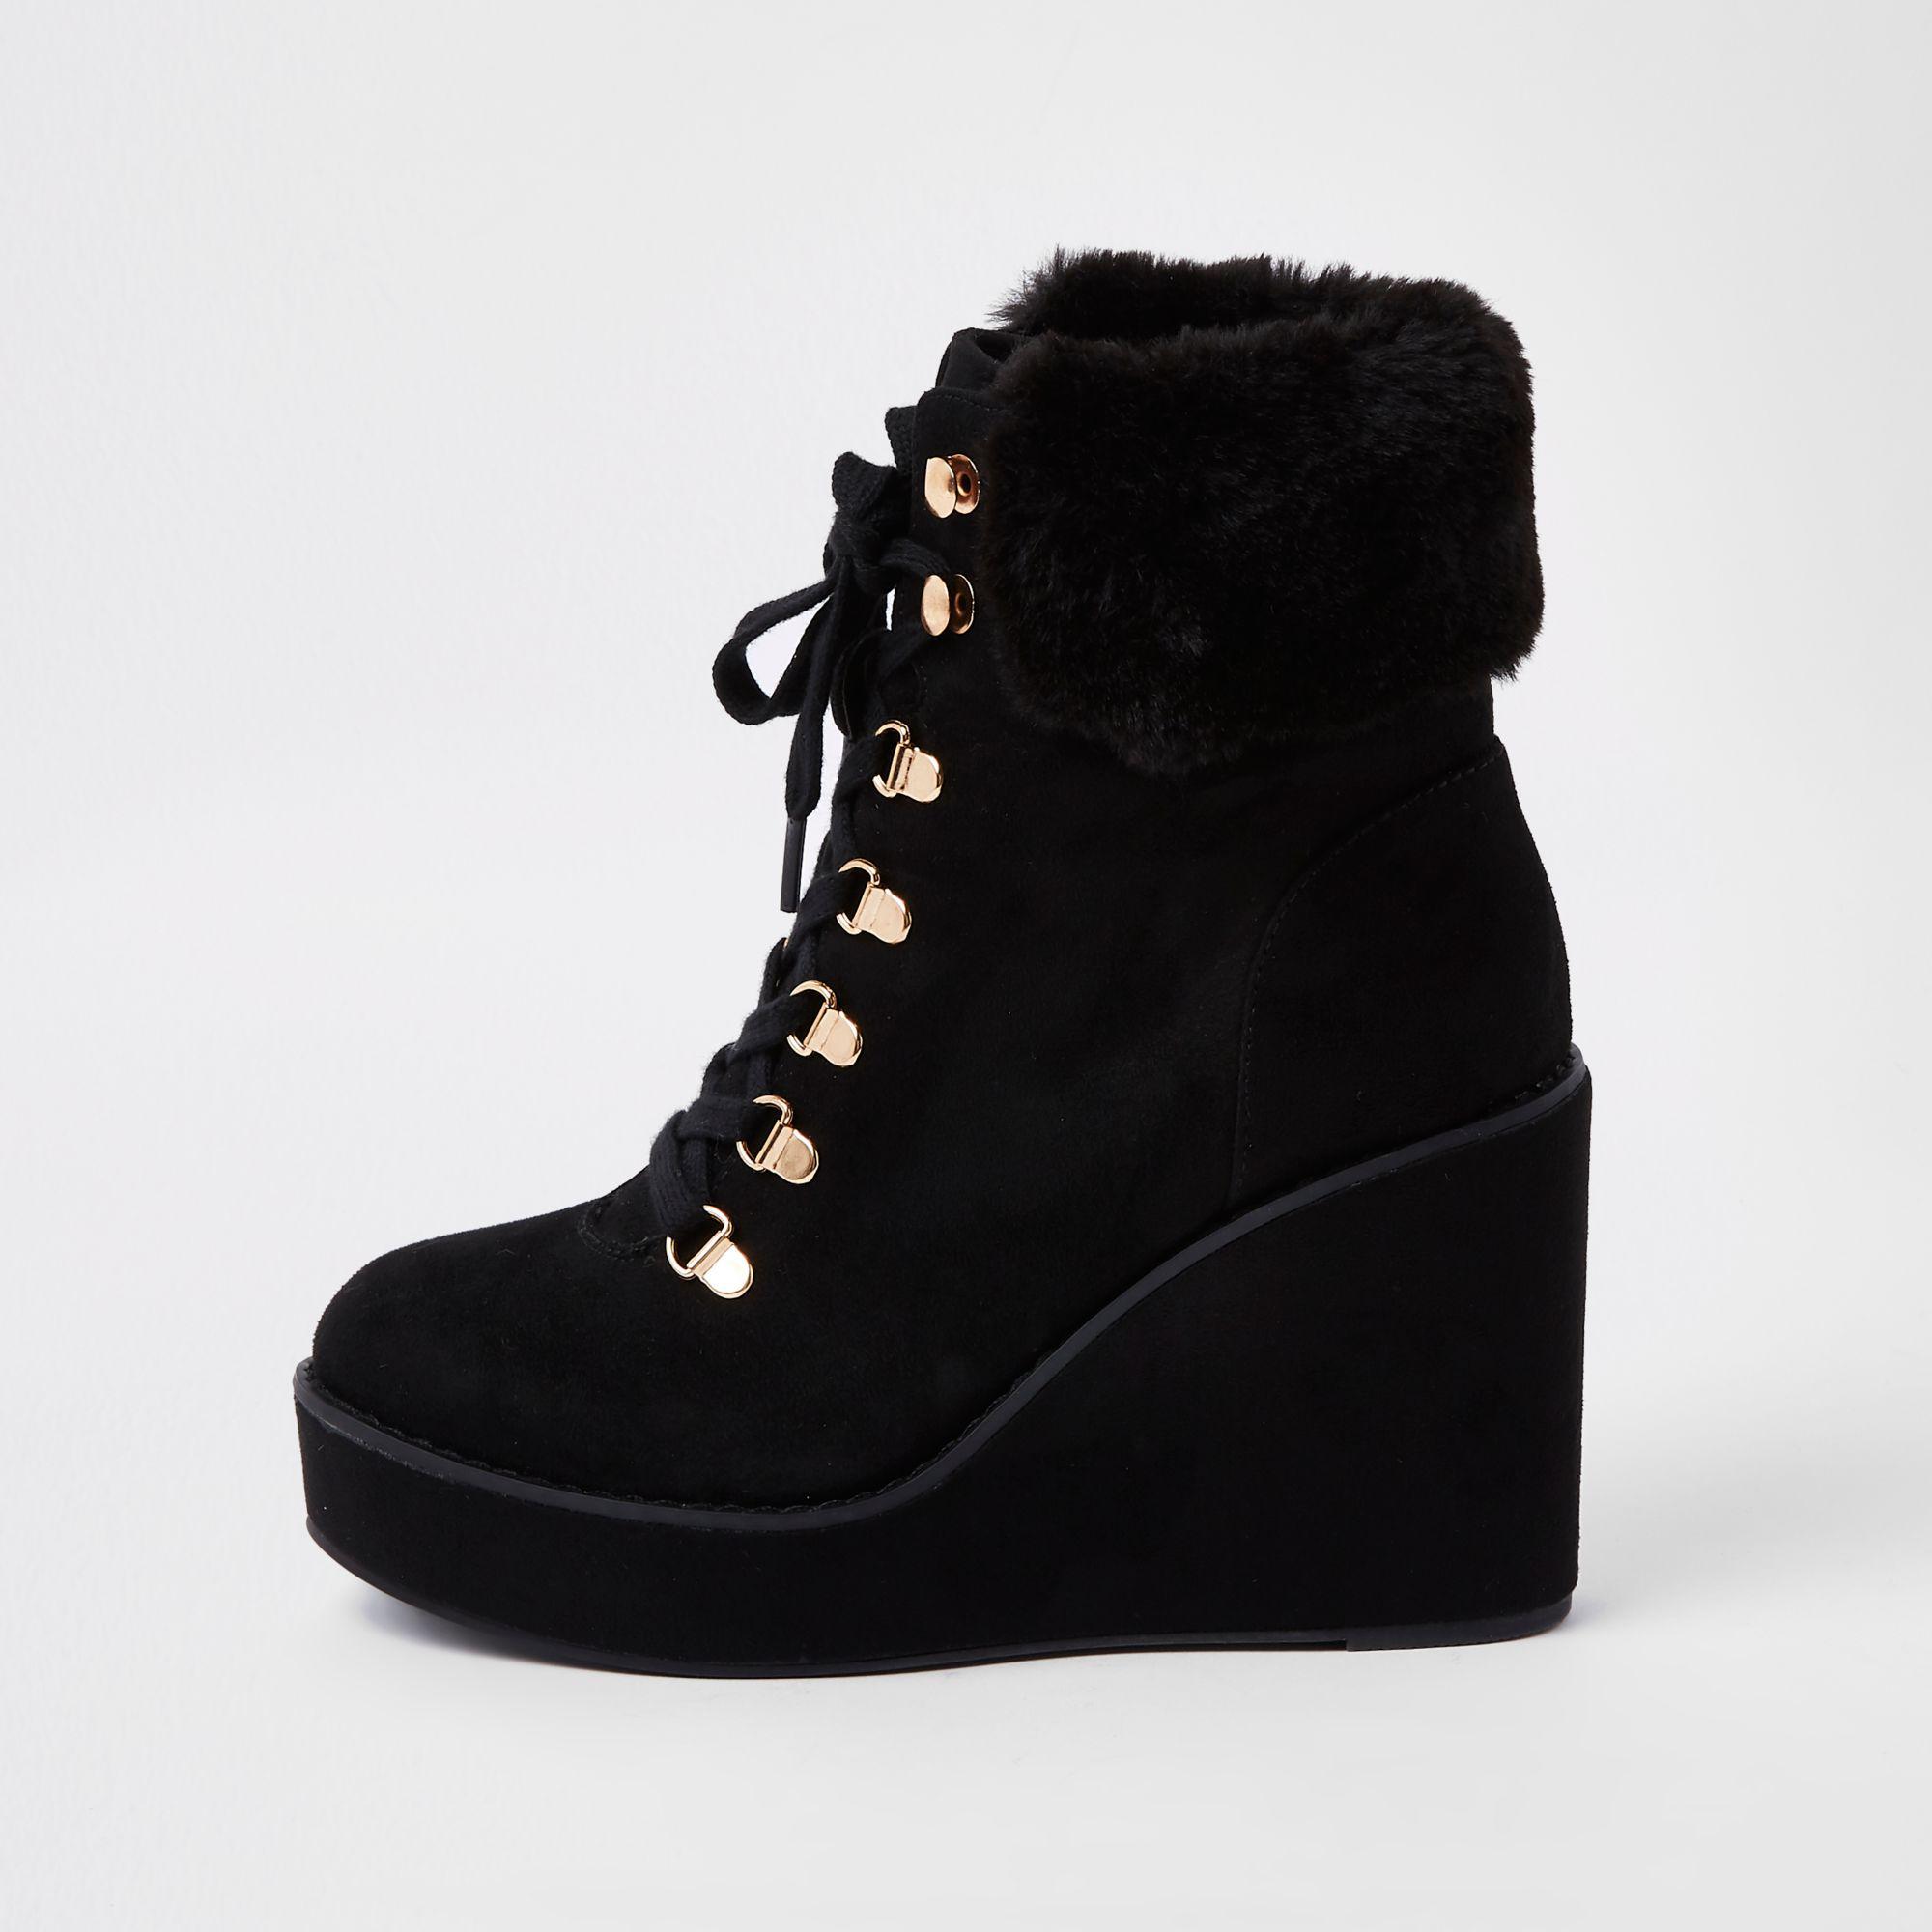 River Island Black Lace-up Wedge Heel Boots - Lyst